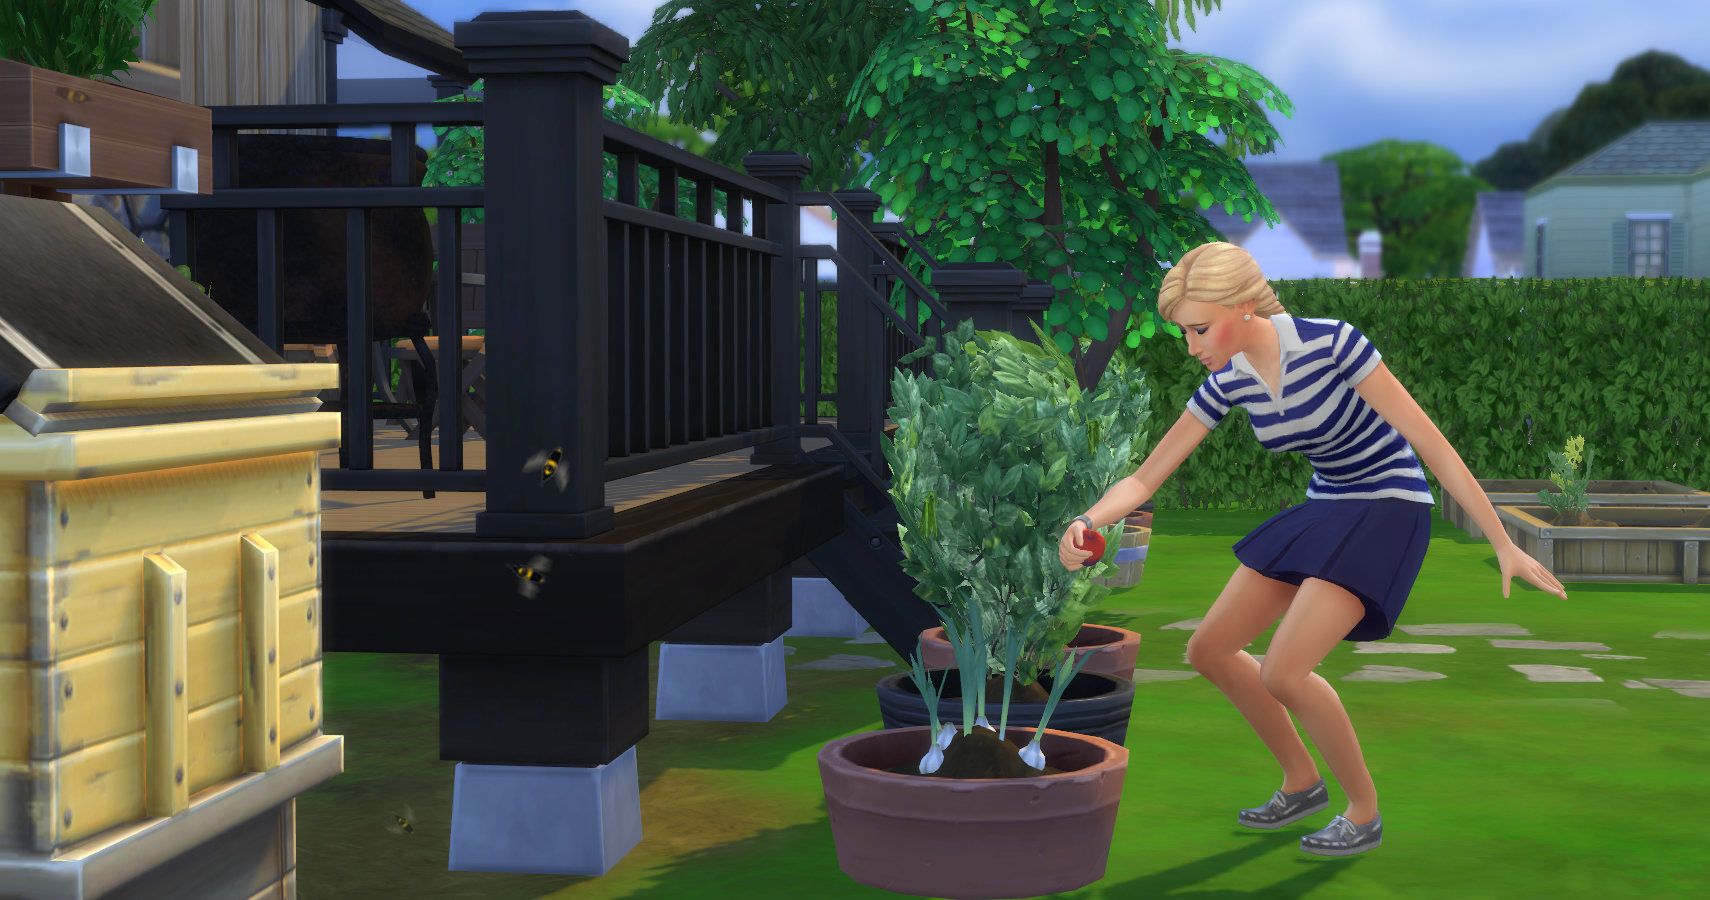 The Sims 4 Seasons Making Money With The Gardening Skill